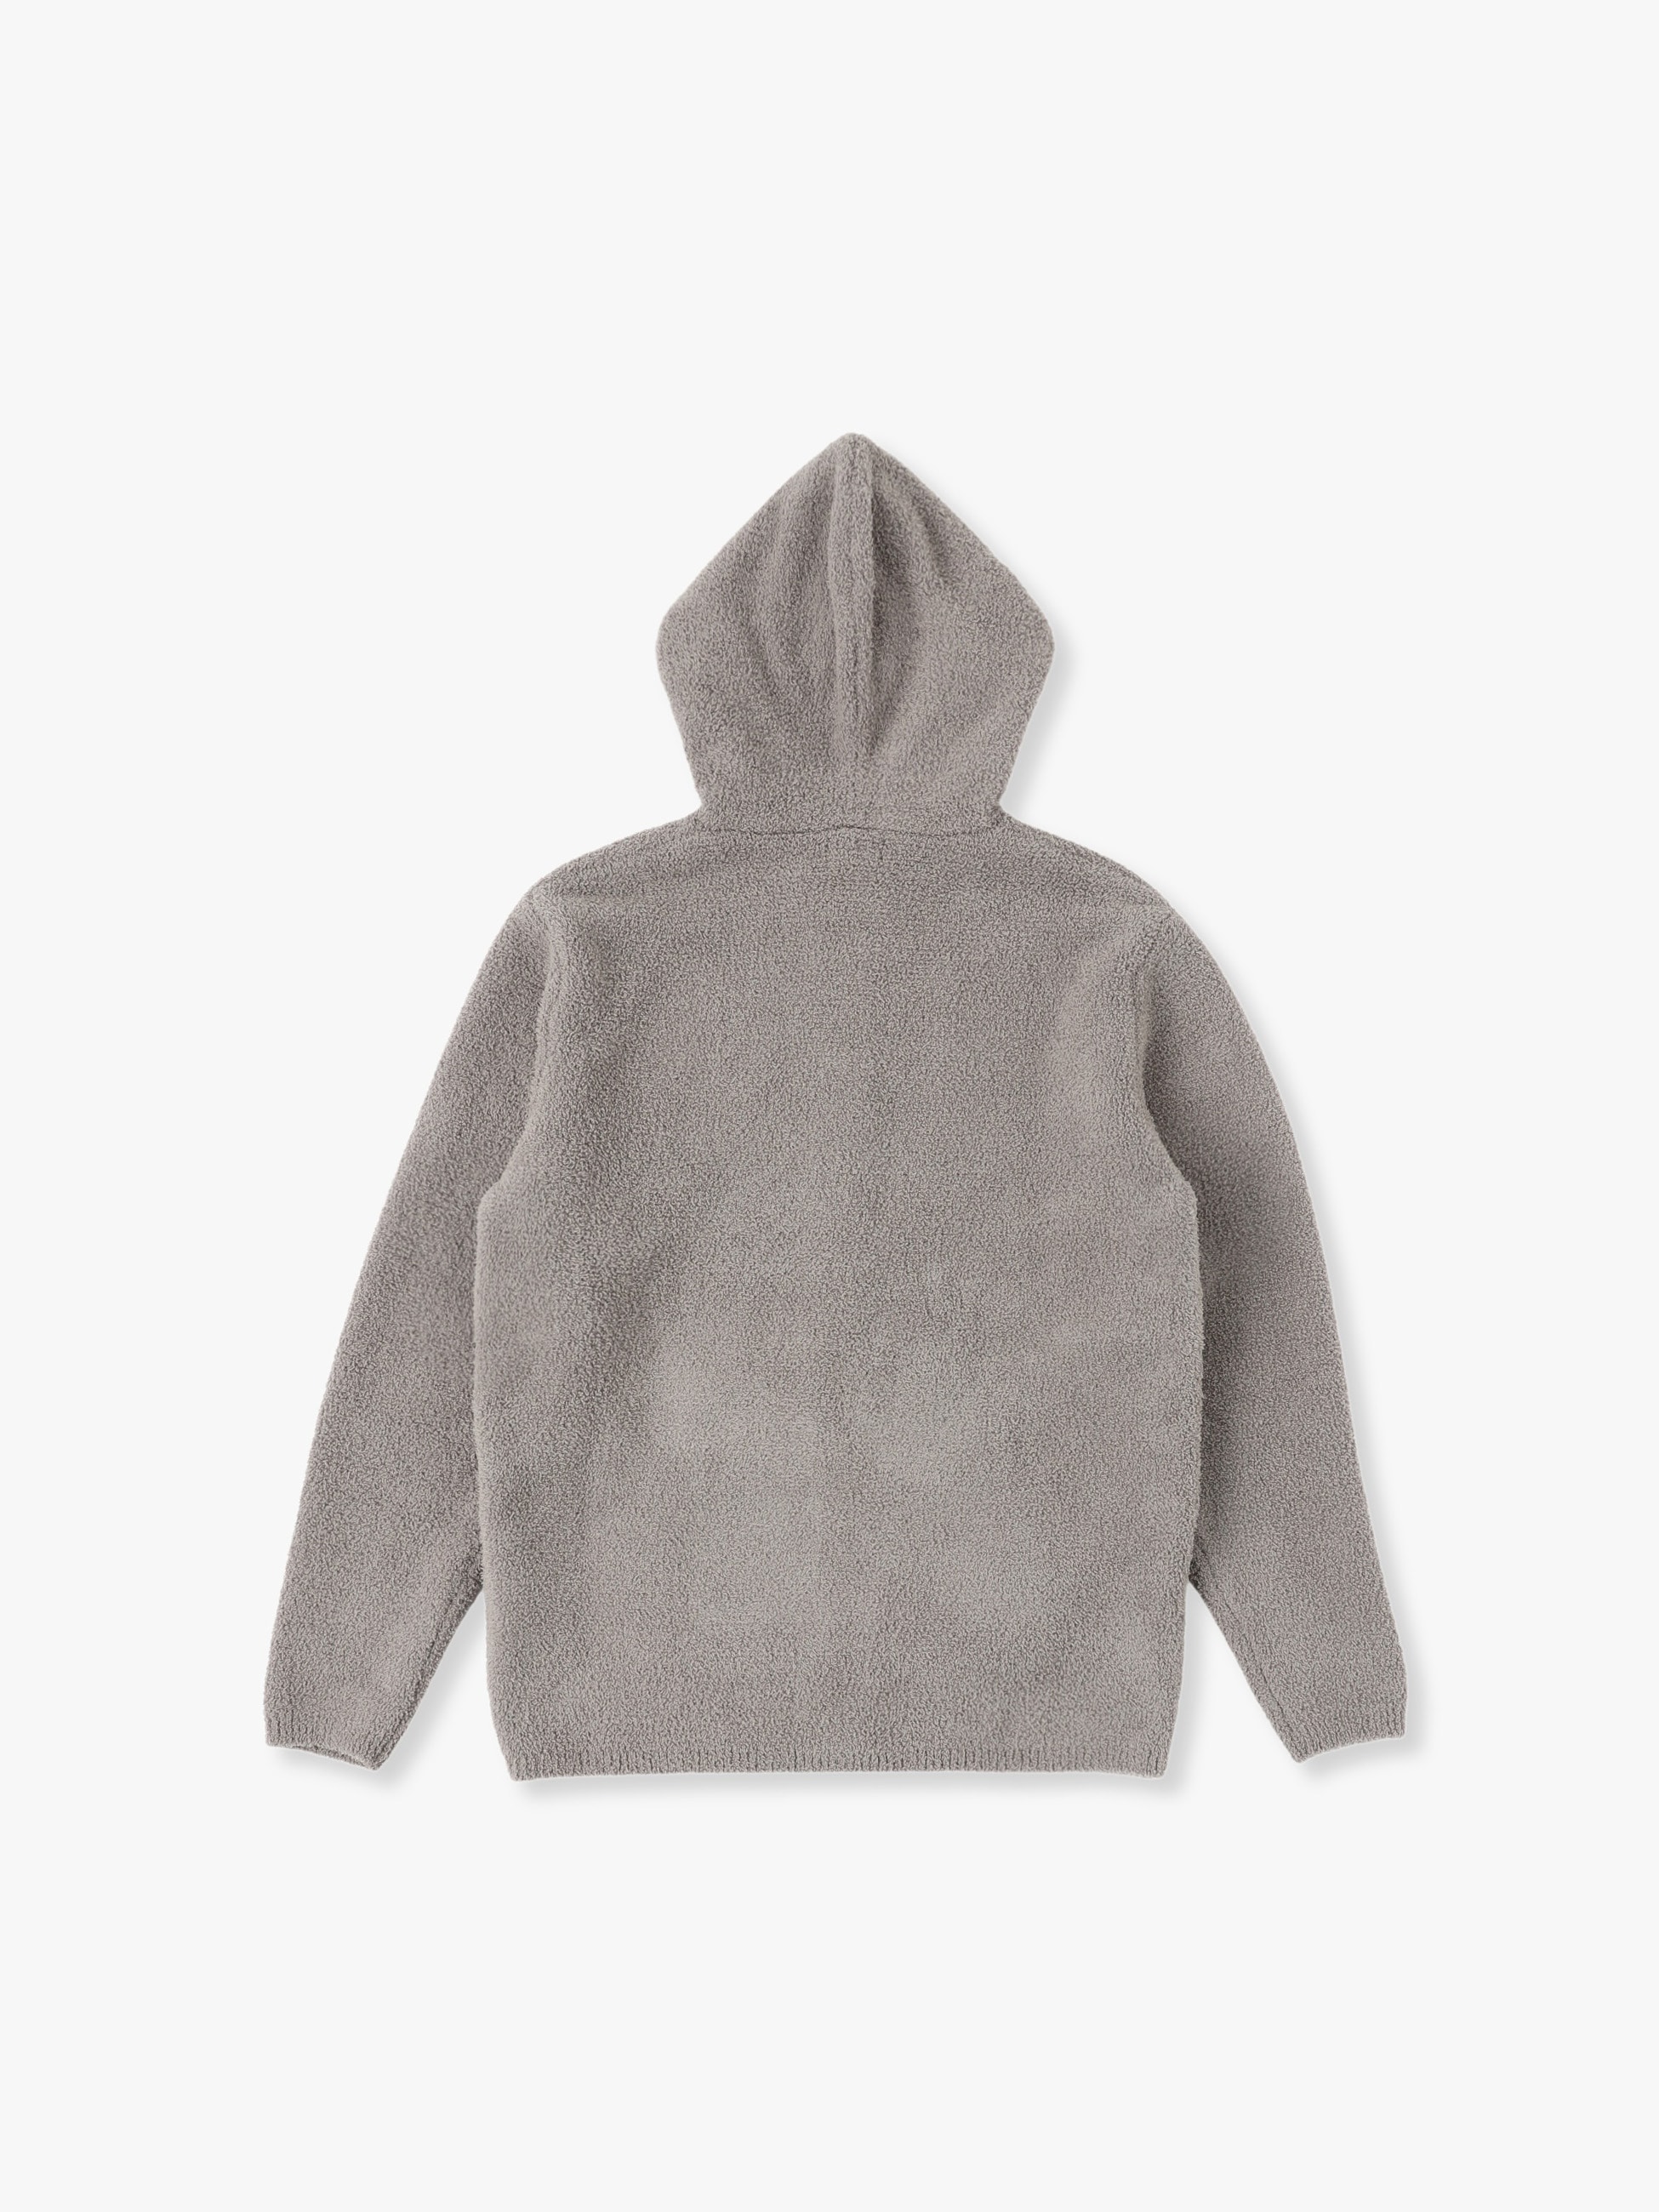 Double Jacquard Solid Hoodie｜BAREFOOT DREAMS for Ron Herman